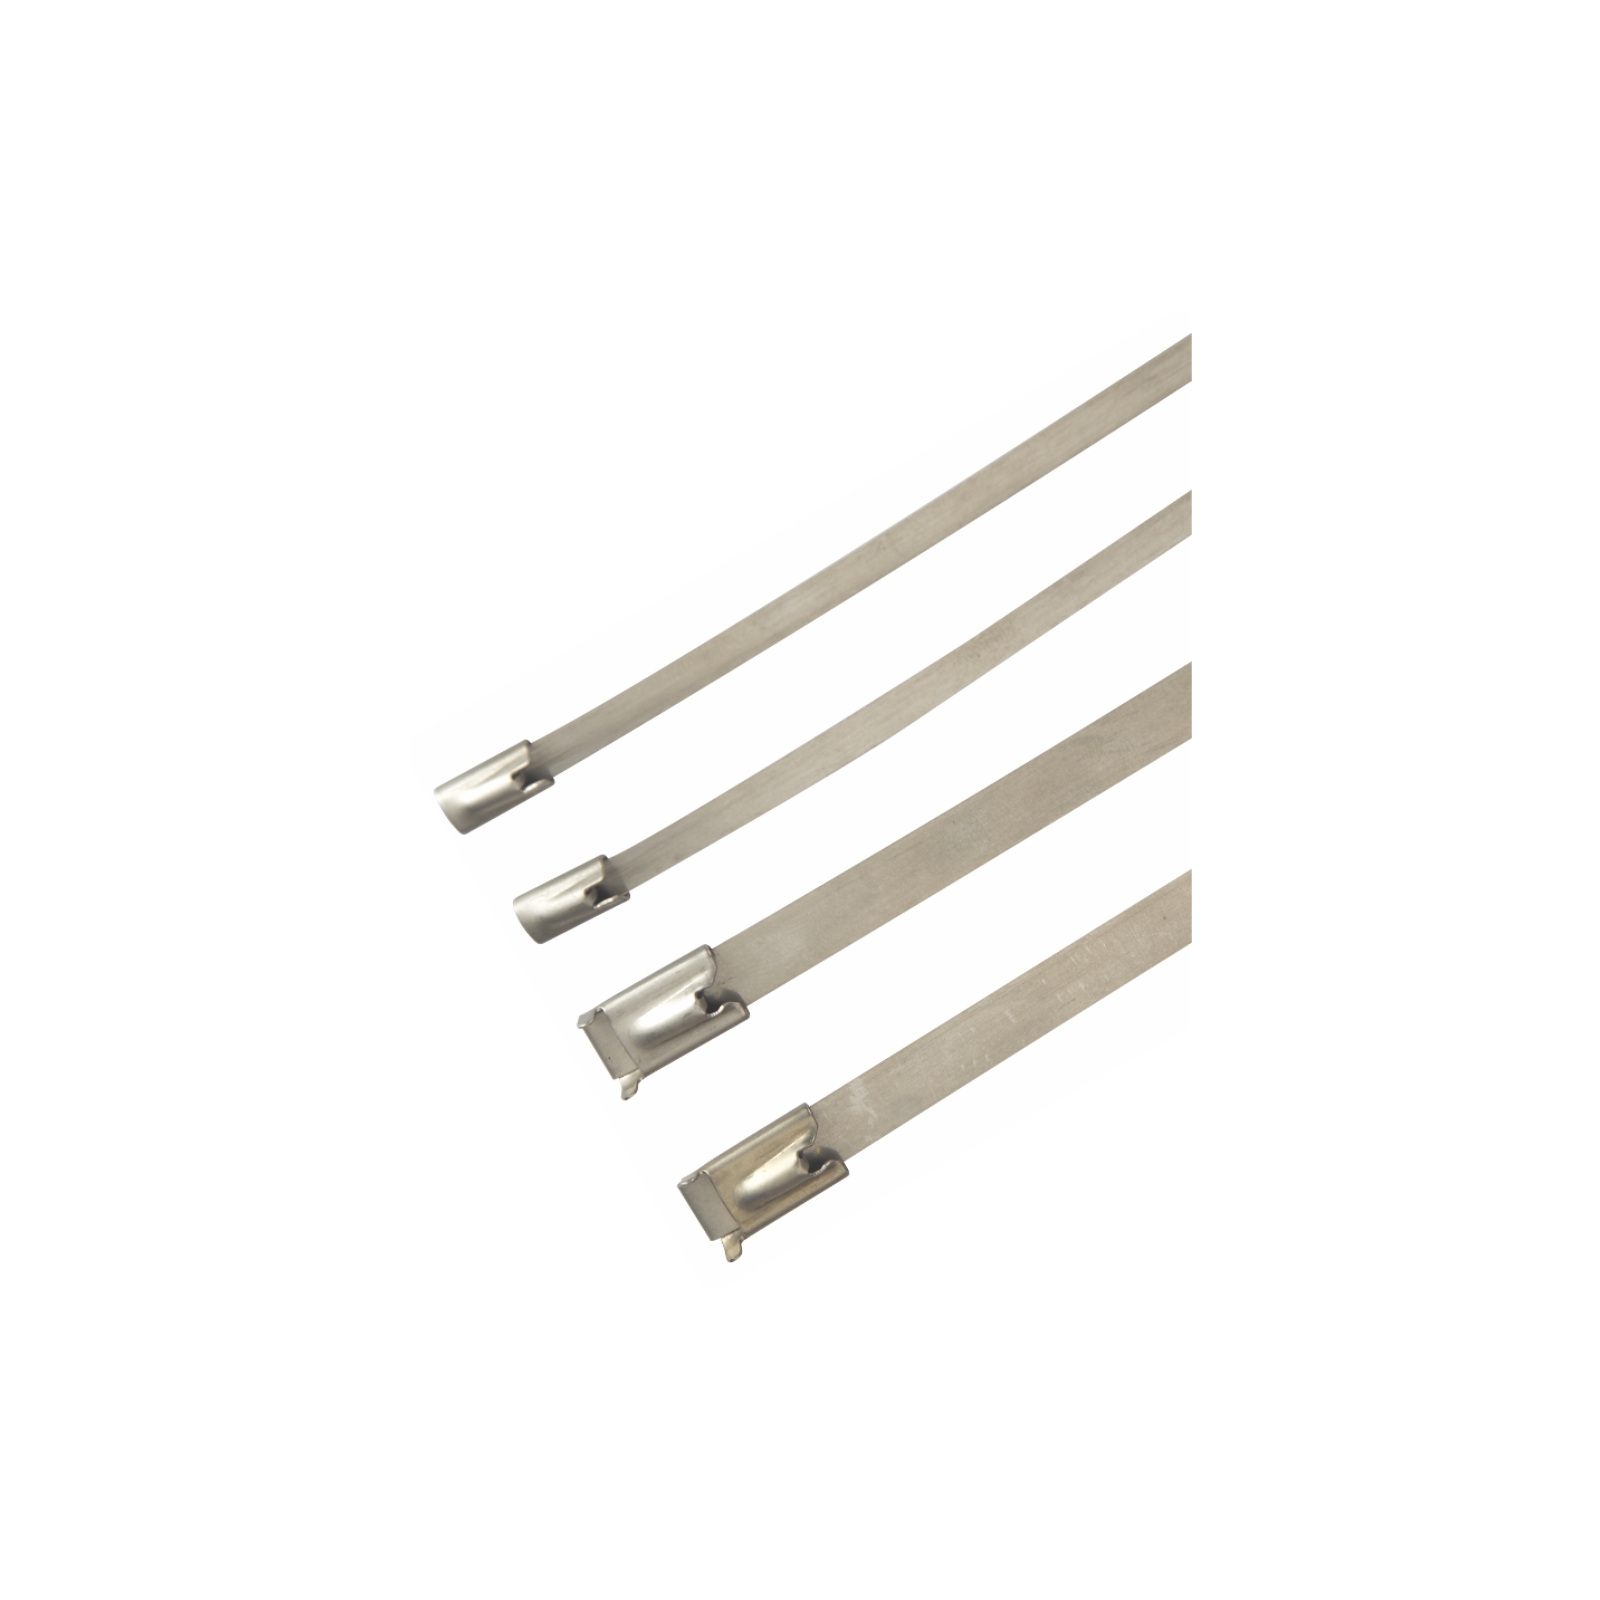 SCT-2 Naked Stainless Steel Cable Tie